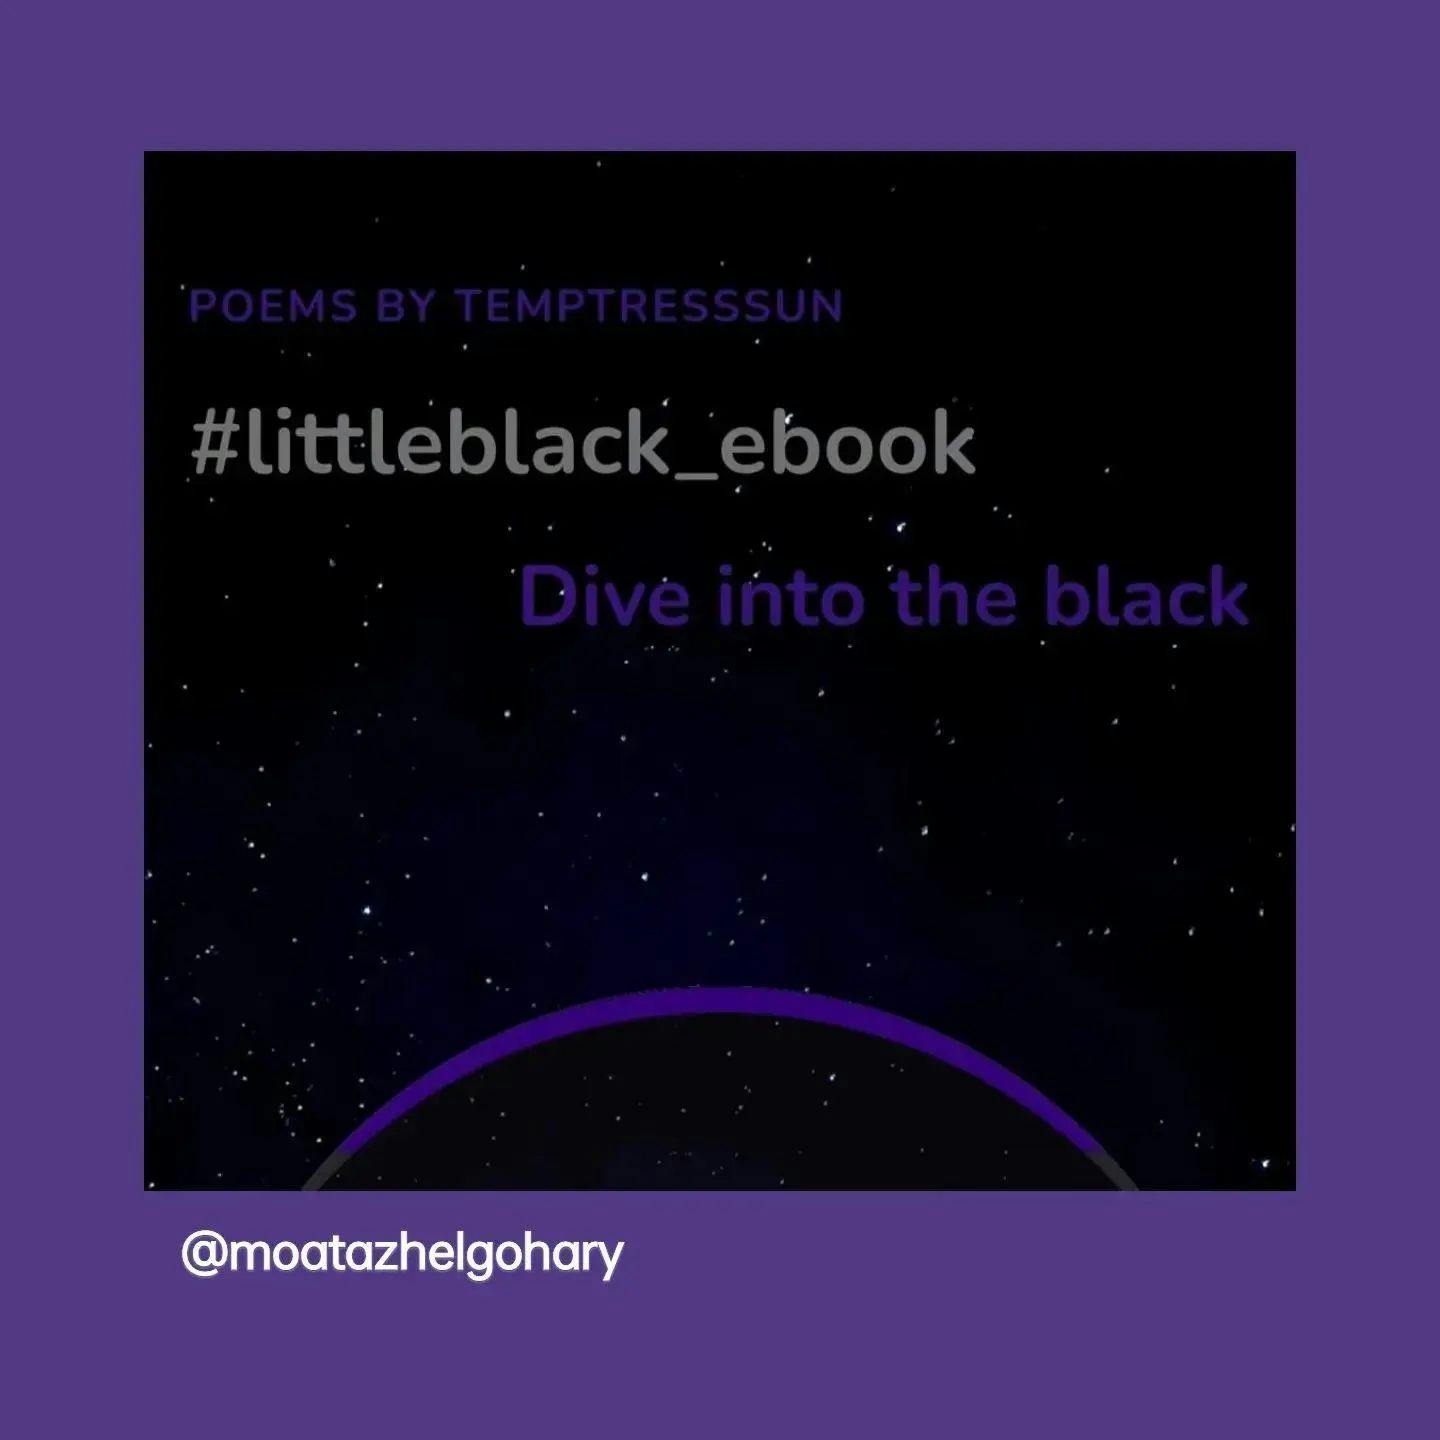 #Signup now to keep yourself posted when #littleblack_ebook is #Out for #preorder
#littleblackbook
Temptresssun
Moataz El-Gohary
#poetry #cairo #egypt
#roots #beautiful #scenery #debate #endless_talks #uprising #lullaby  #sun #temptresssun  #music #album #outnow #nowplaying #photography #youtube #Spotify #SoundCloud #bandcamp #AppleMusic #deezer #reverbnation #Twitter